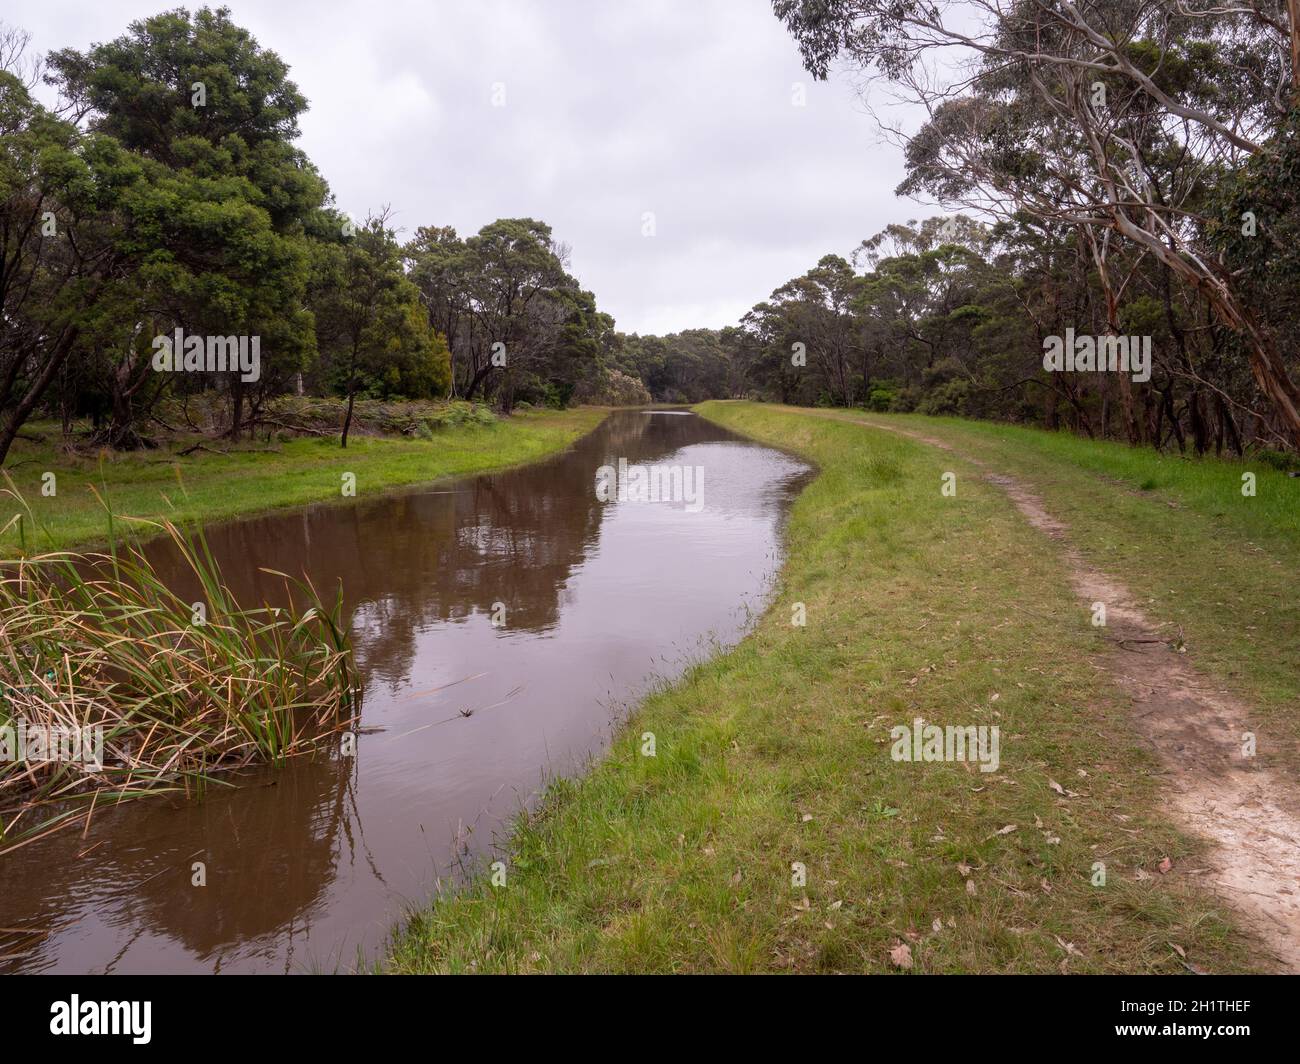 Full Catch Drain after heavy spring rains at Devilbend Natural Features Reserve on The Mornington Peninsula, Victoria, Australia. Stock Photo